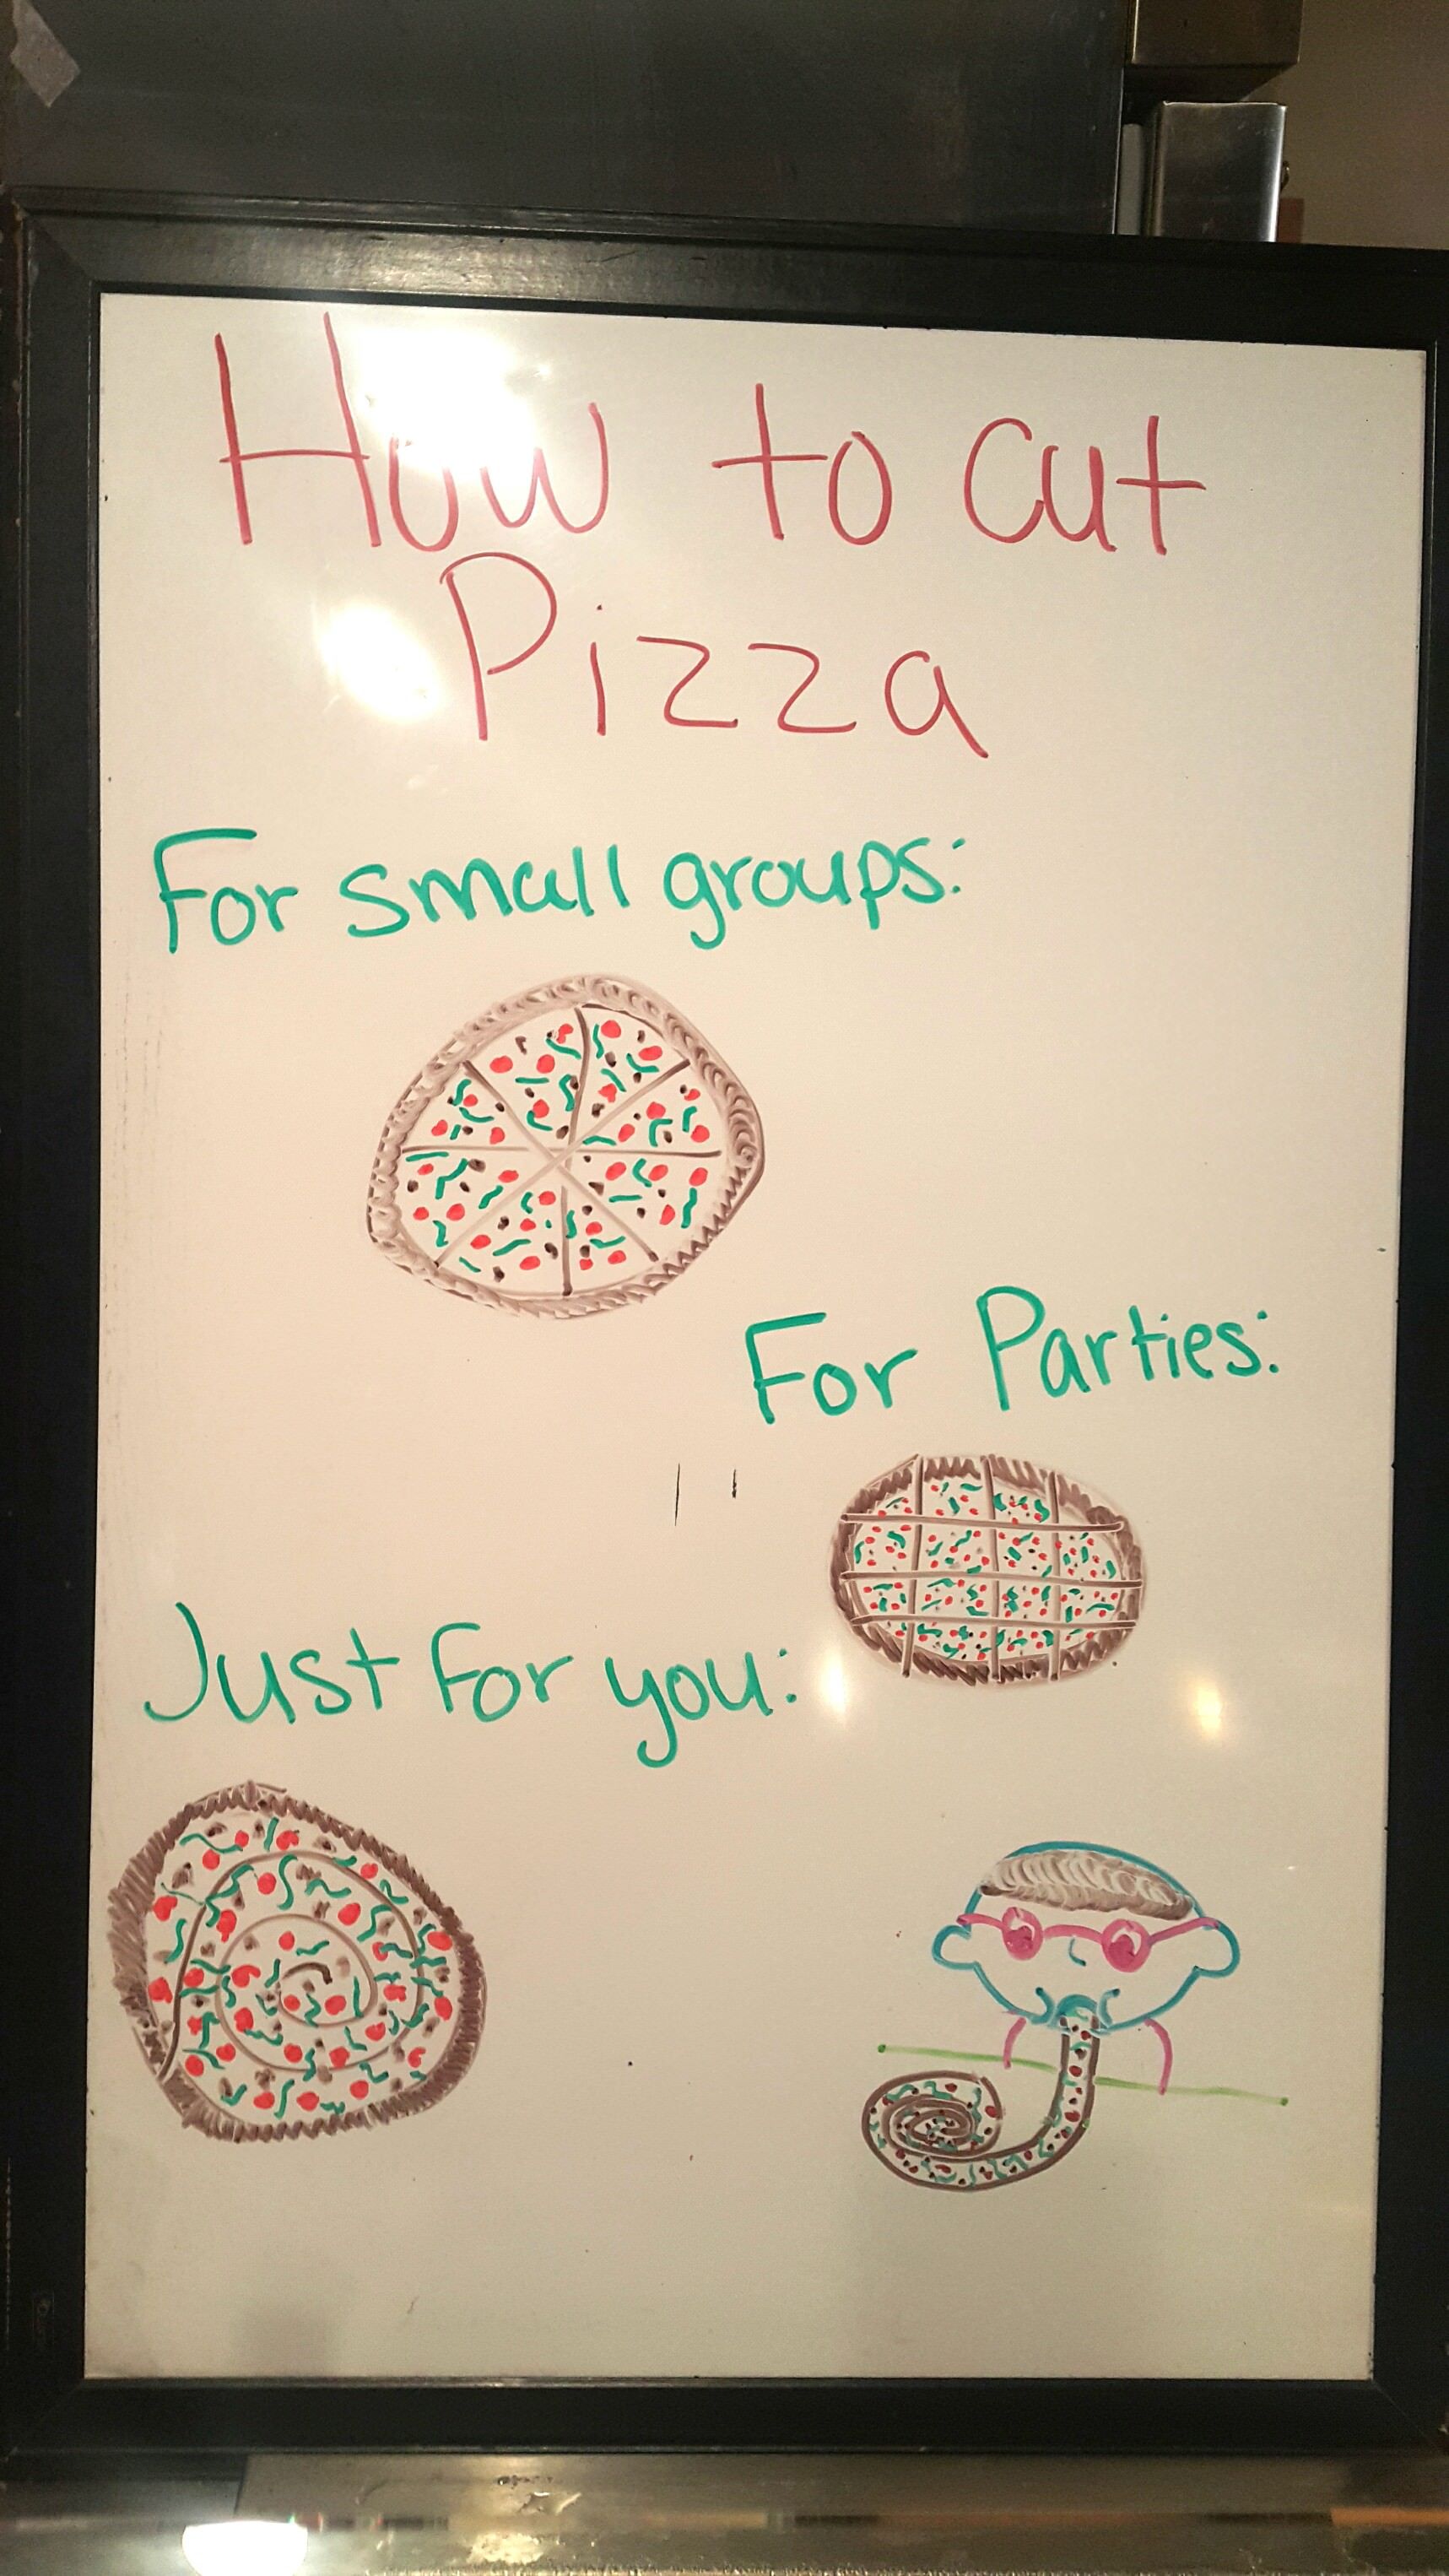 joke of the day - How to cut Pizza For small groups For Parties Just for you